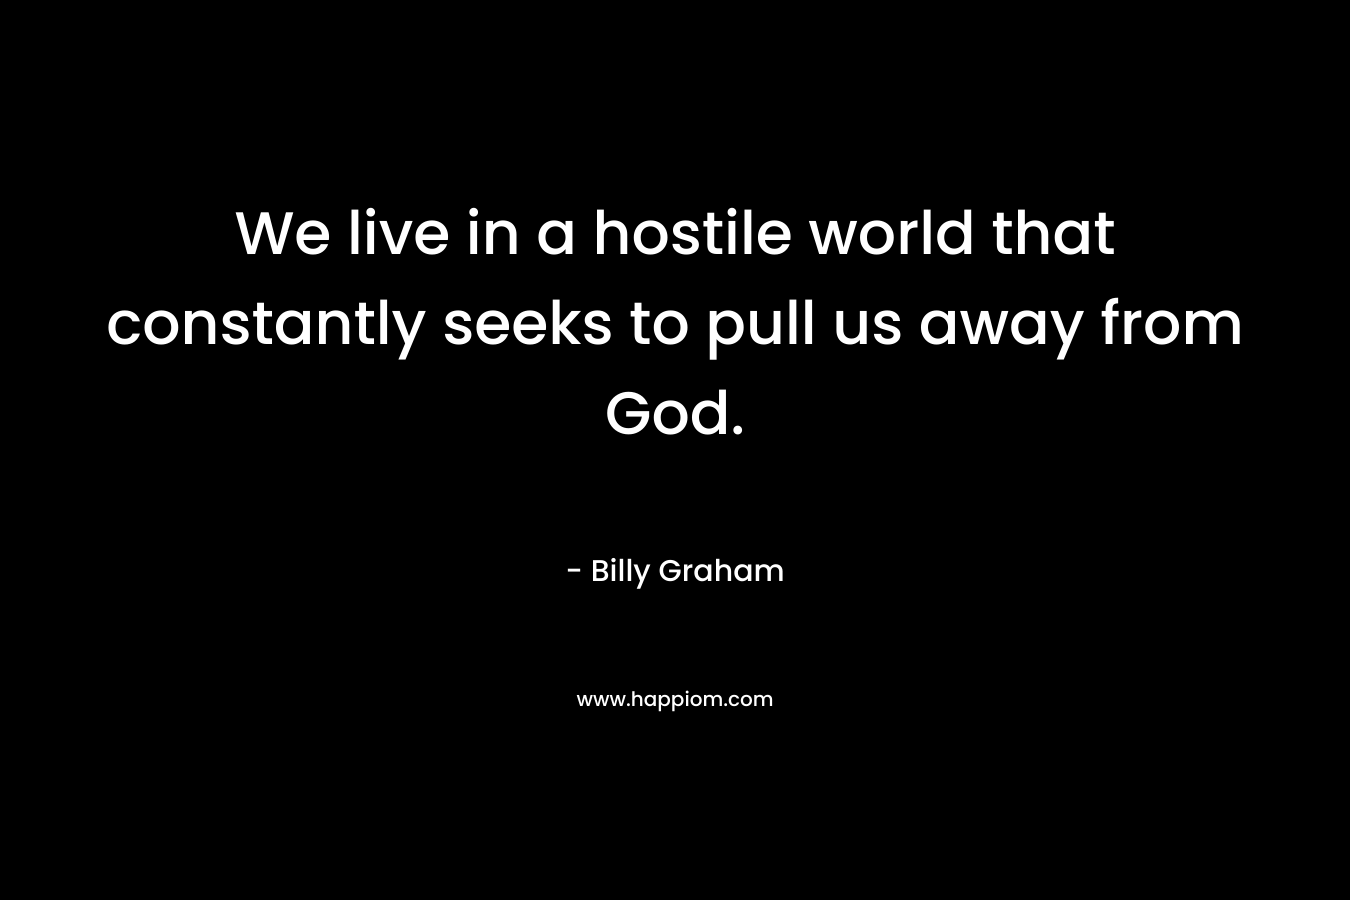 We live in a hostile world that constantly seeks to pull us away from God. – Billy Graham